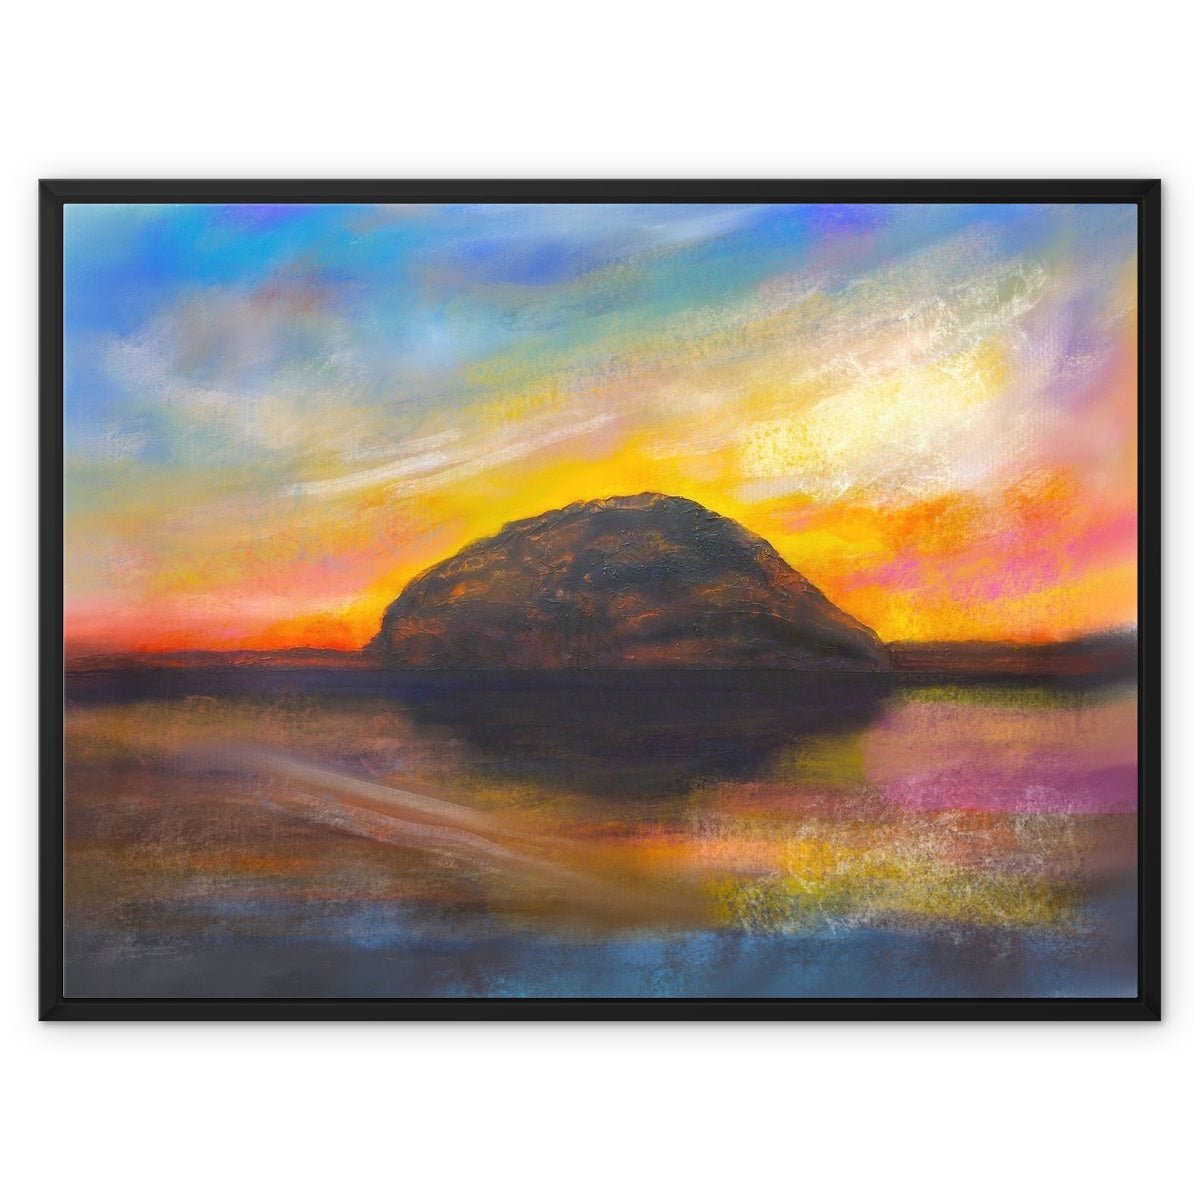 Ailsa Craig Dusk Painting | Framed Canvas From Scotland-Floating Framed Canvas Prints-Arran Art Gallery-32"x24"-Black Frame-Paintings, Prints, Homeware, Art Gifts From Scotland By Scottish Artist Kevin Hunter